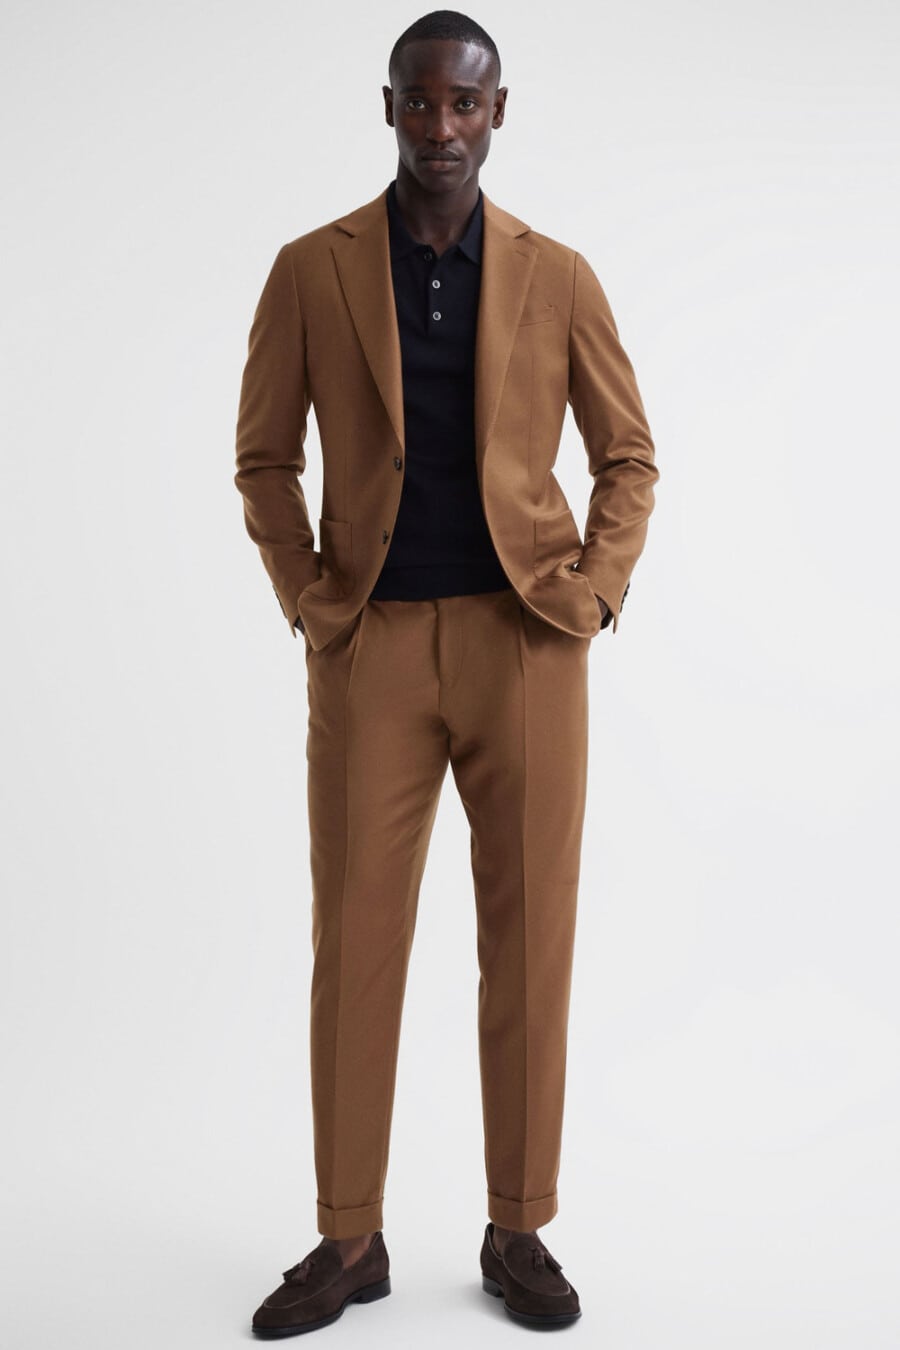 Men's brown suit, black polo shirt and brown suede tassel loafers outfit